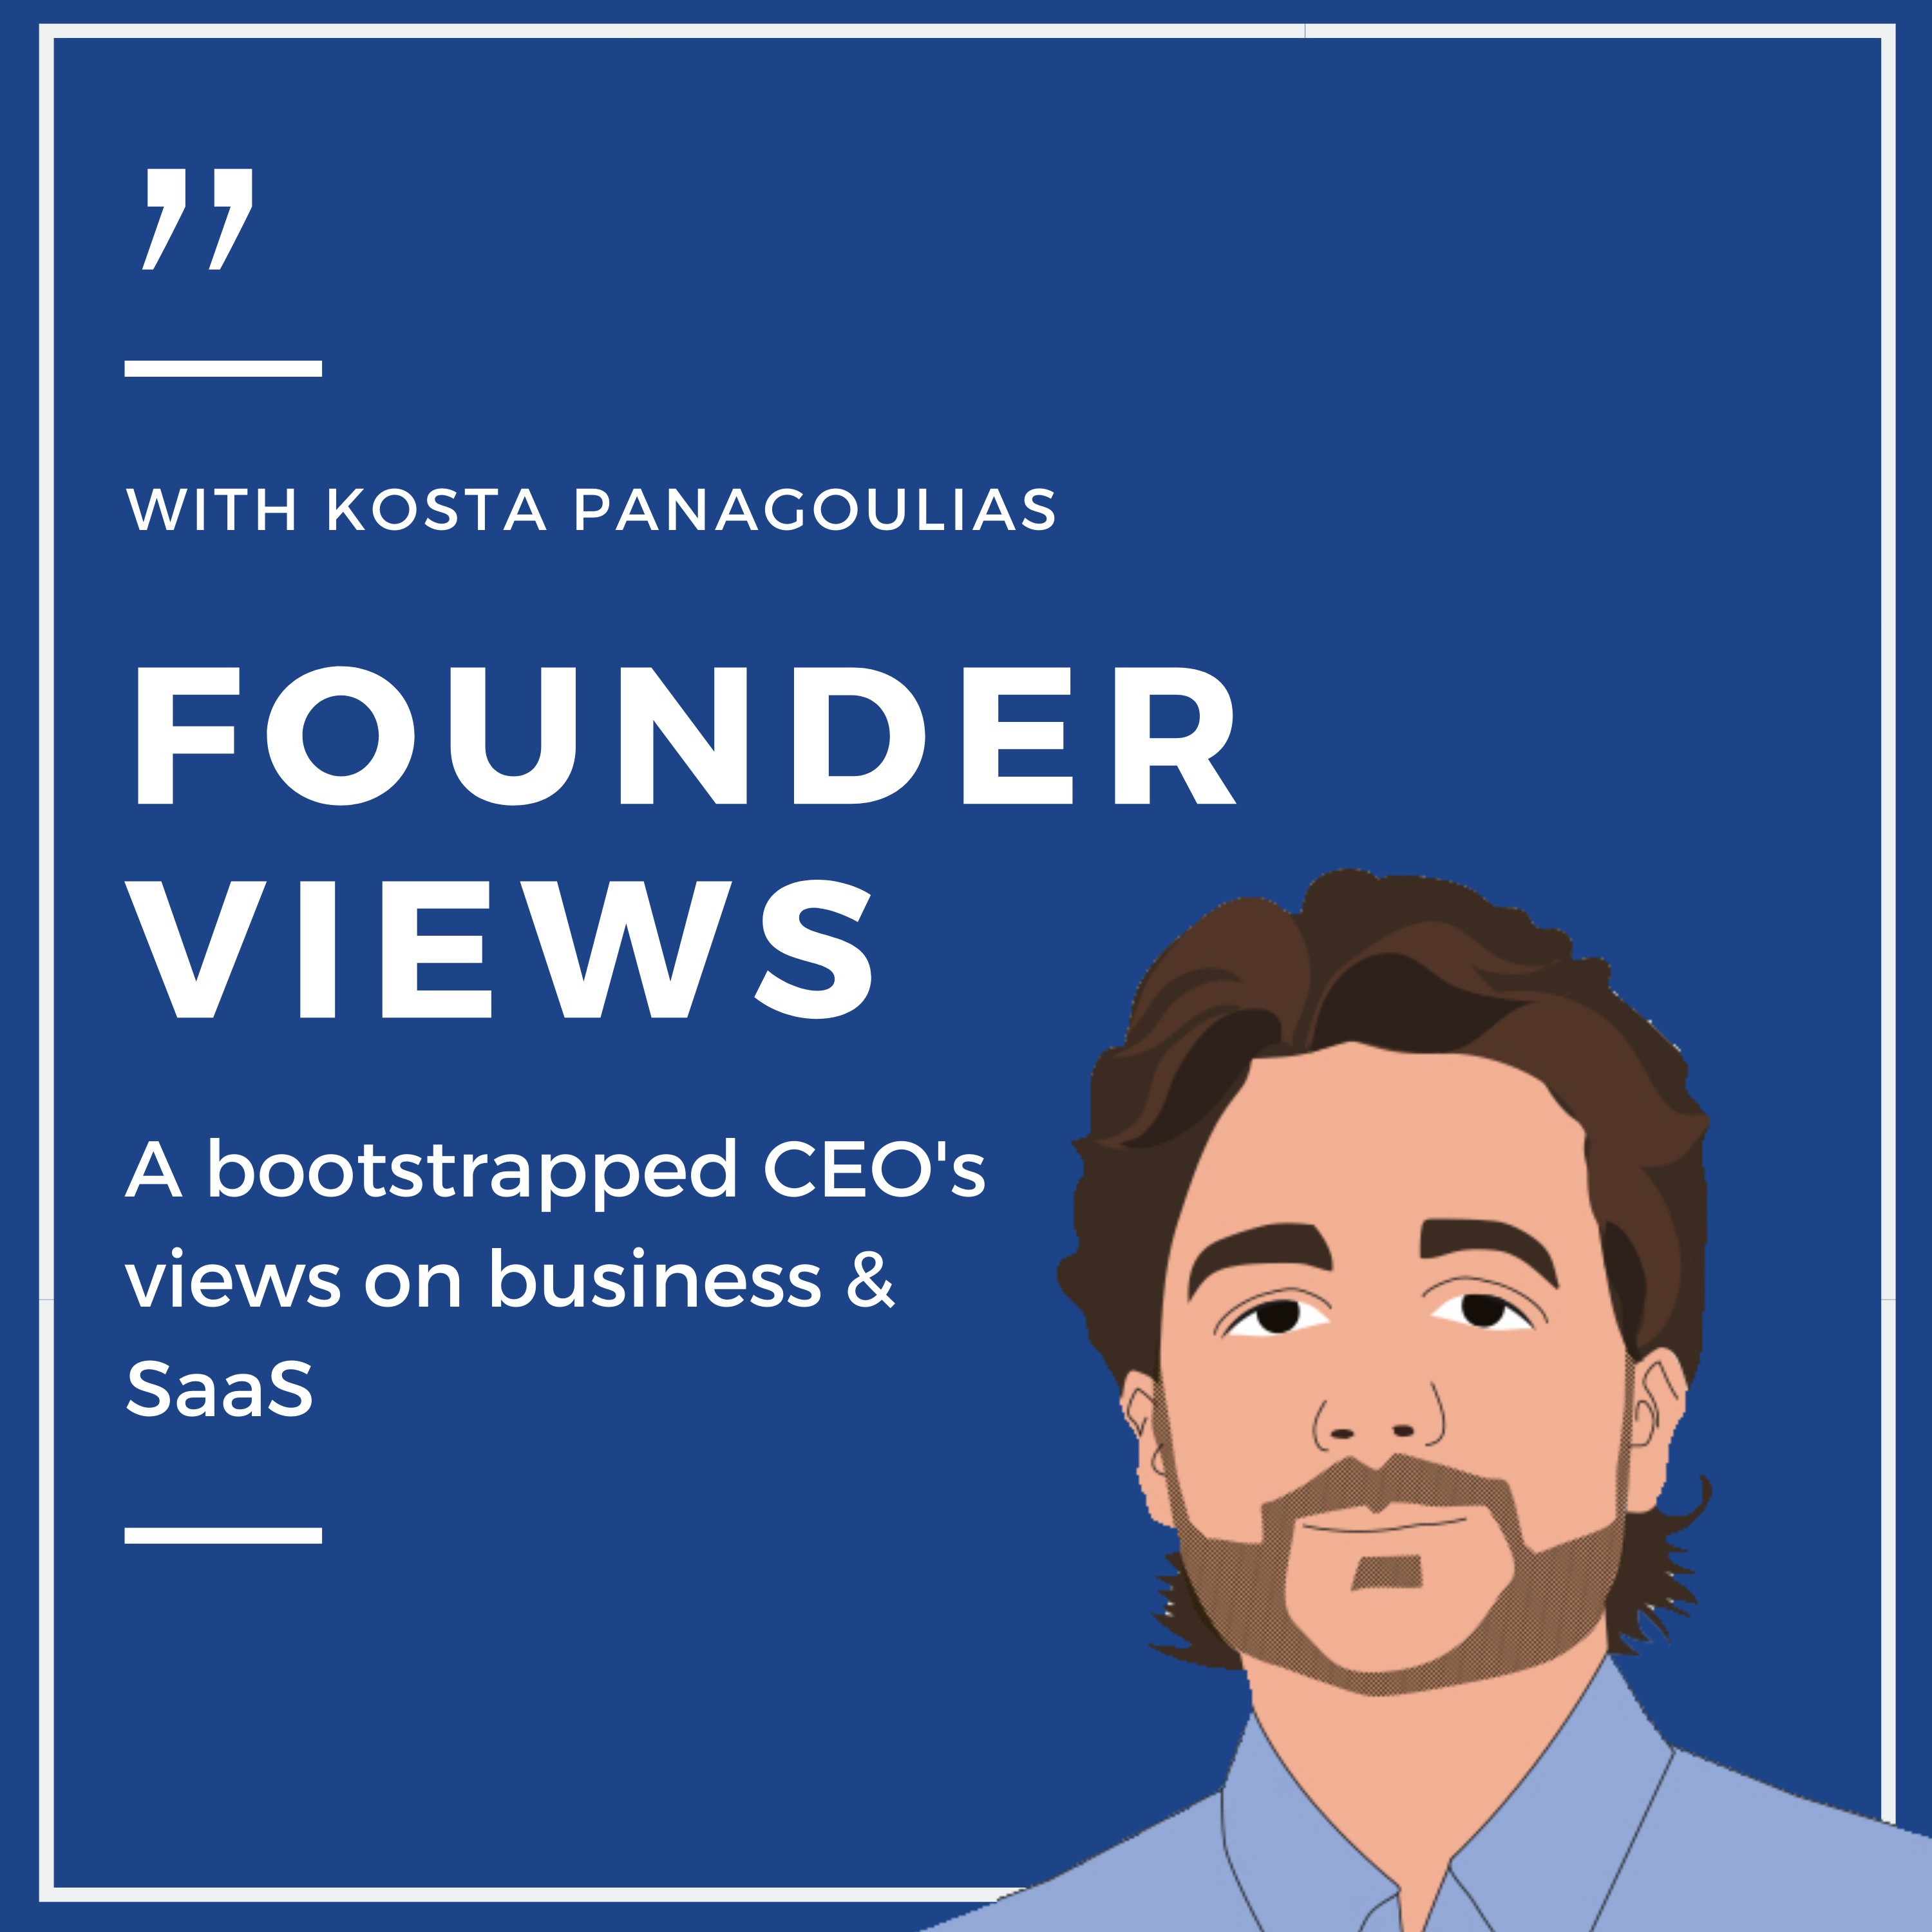 Founder Views - A bootstrapped CEO’s views on business & SaaS